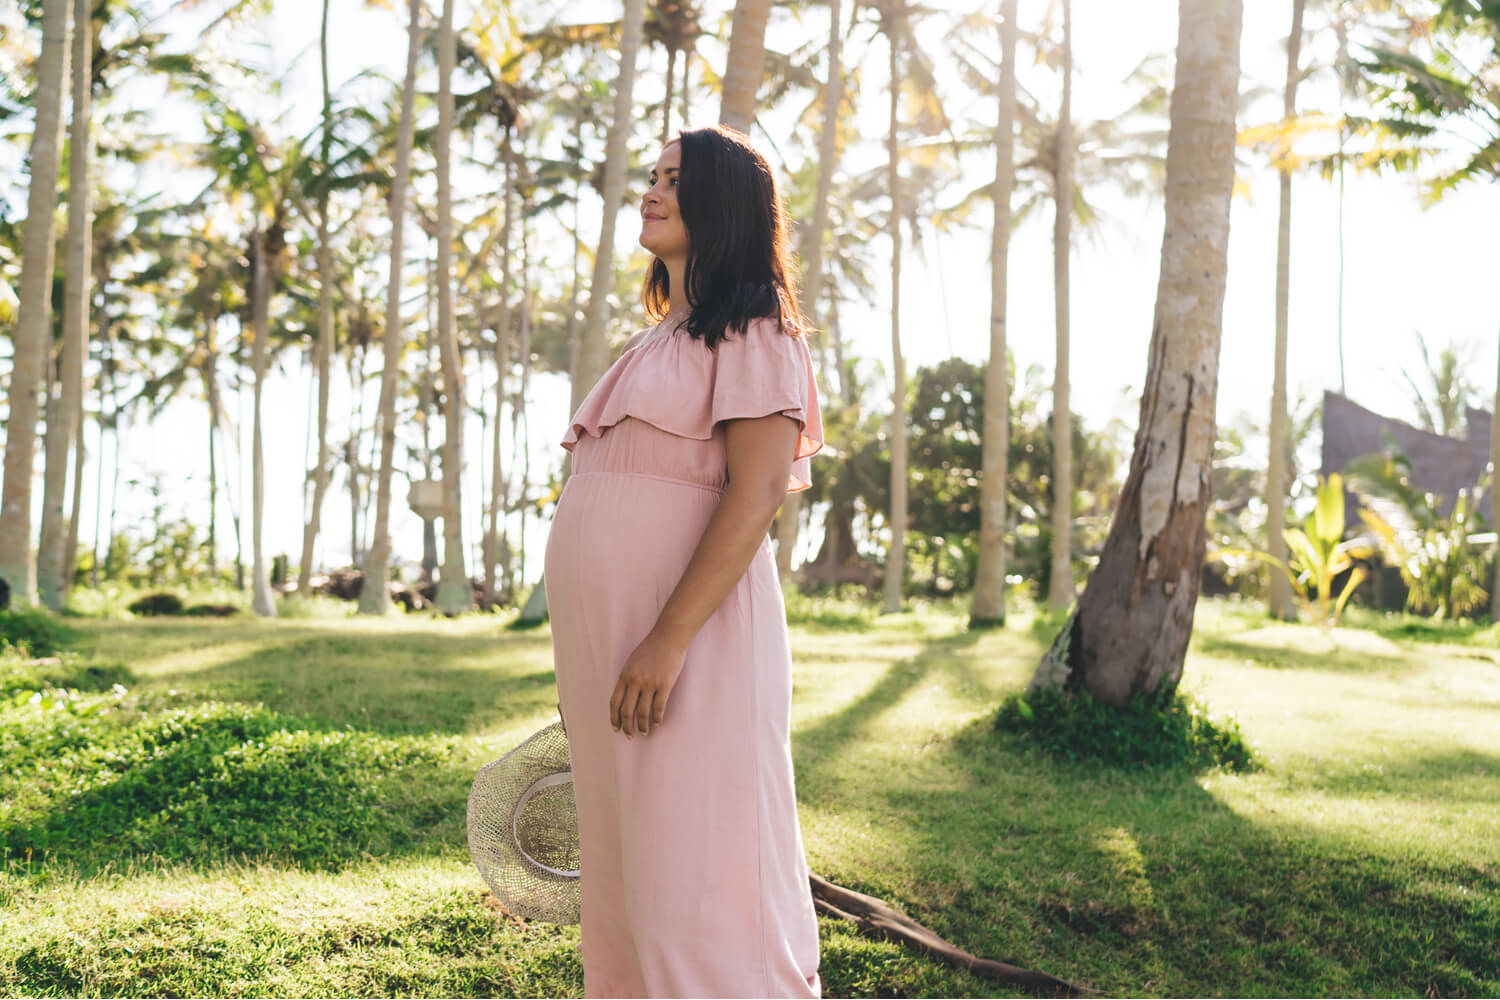 Advantages Of Wearing Maxi Dresses During Pregnancy